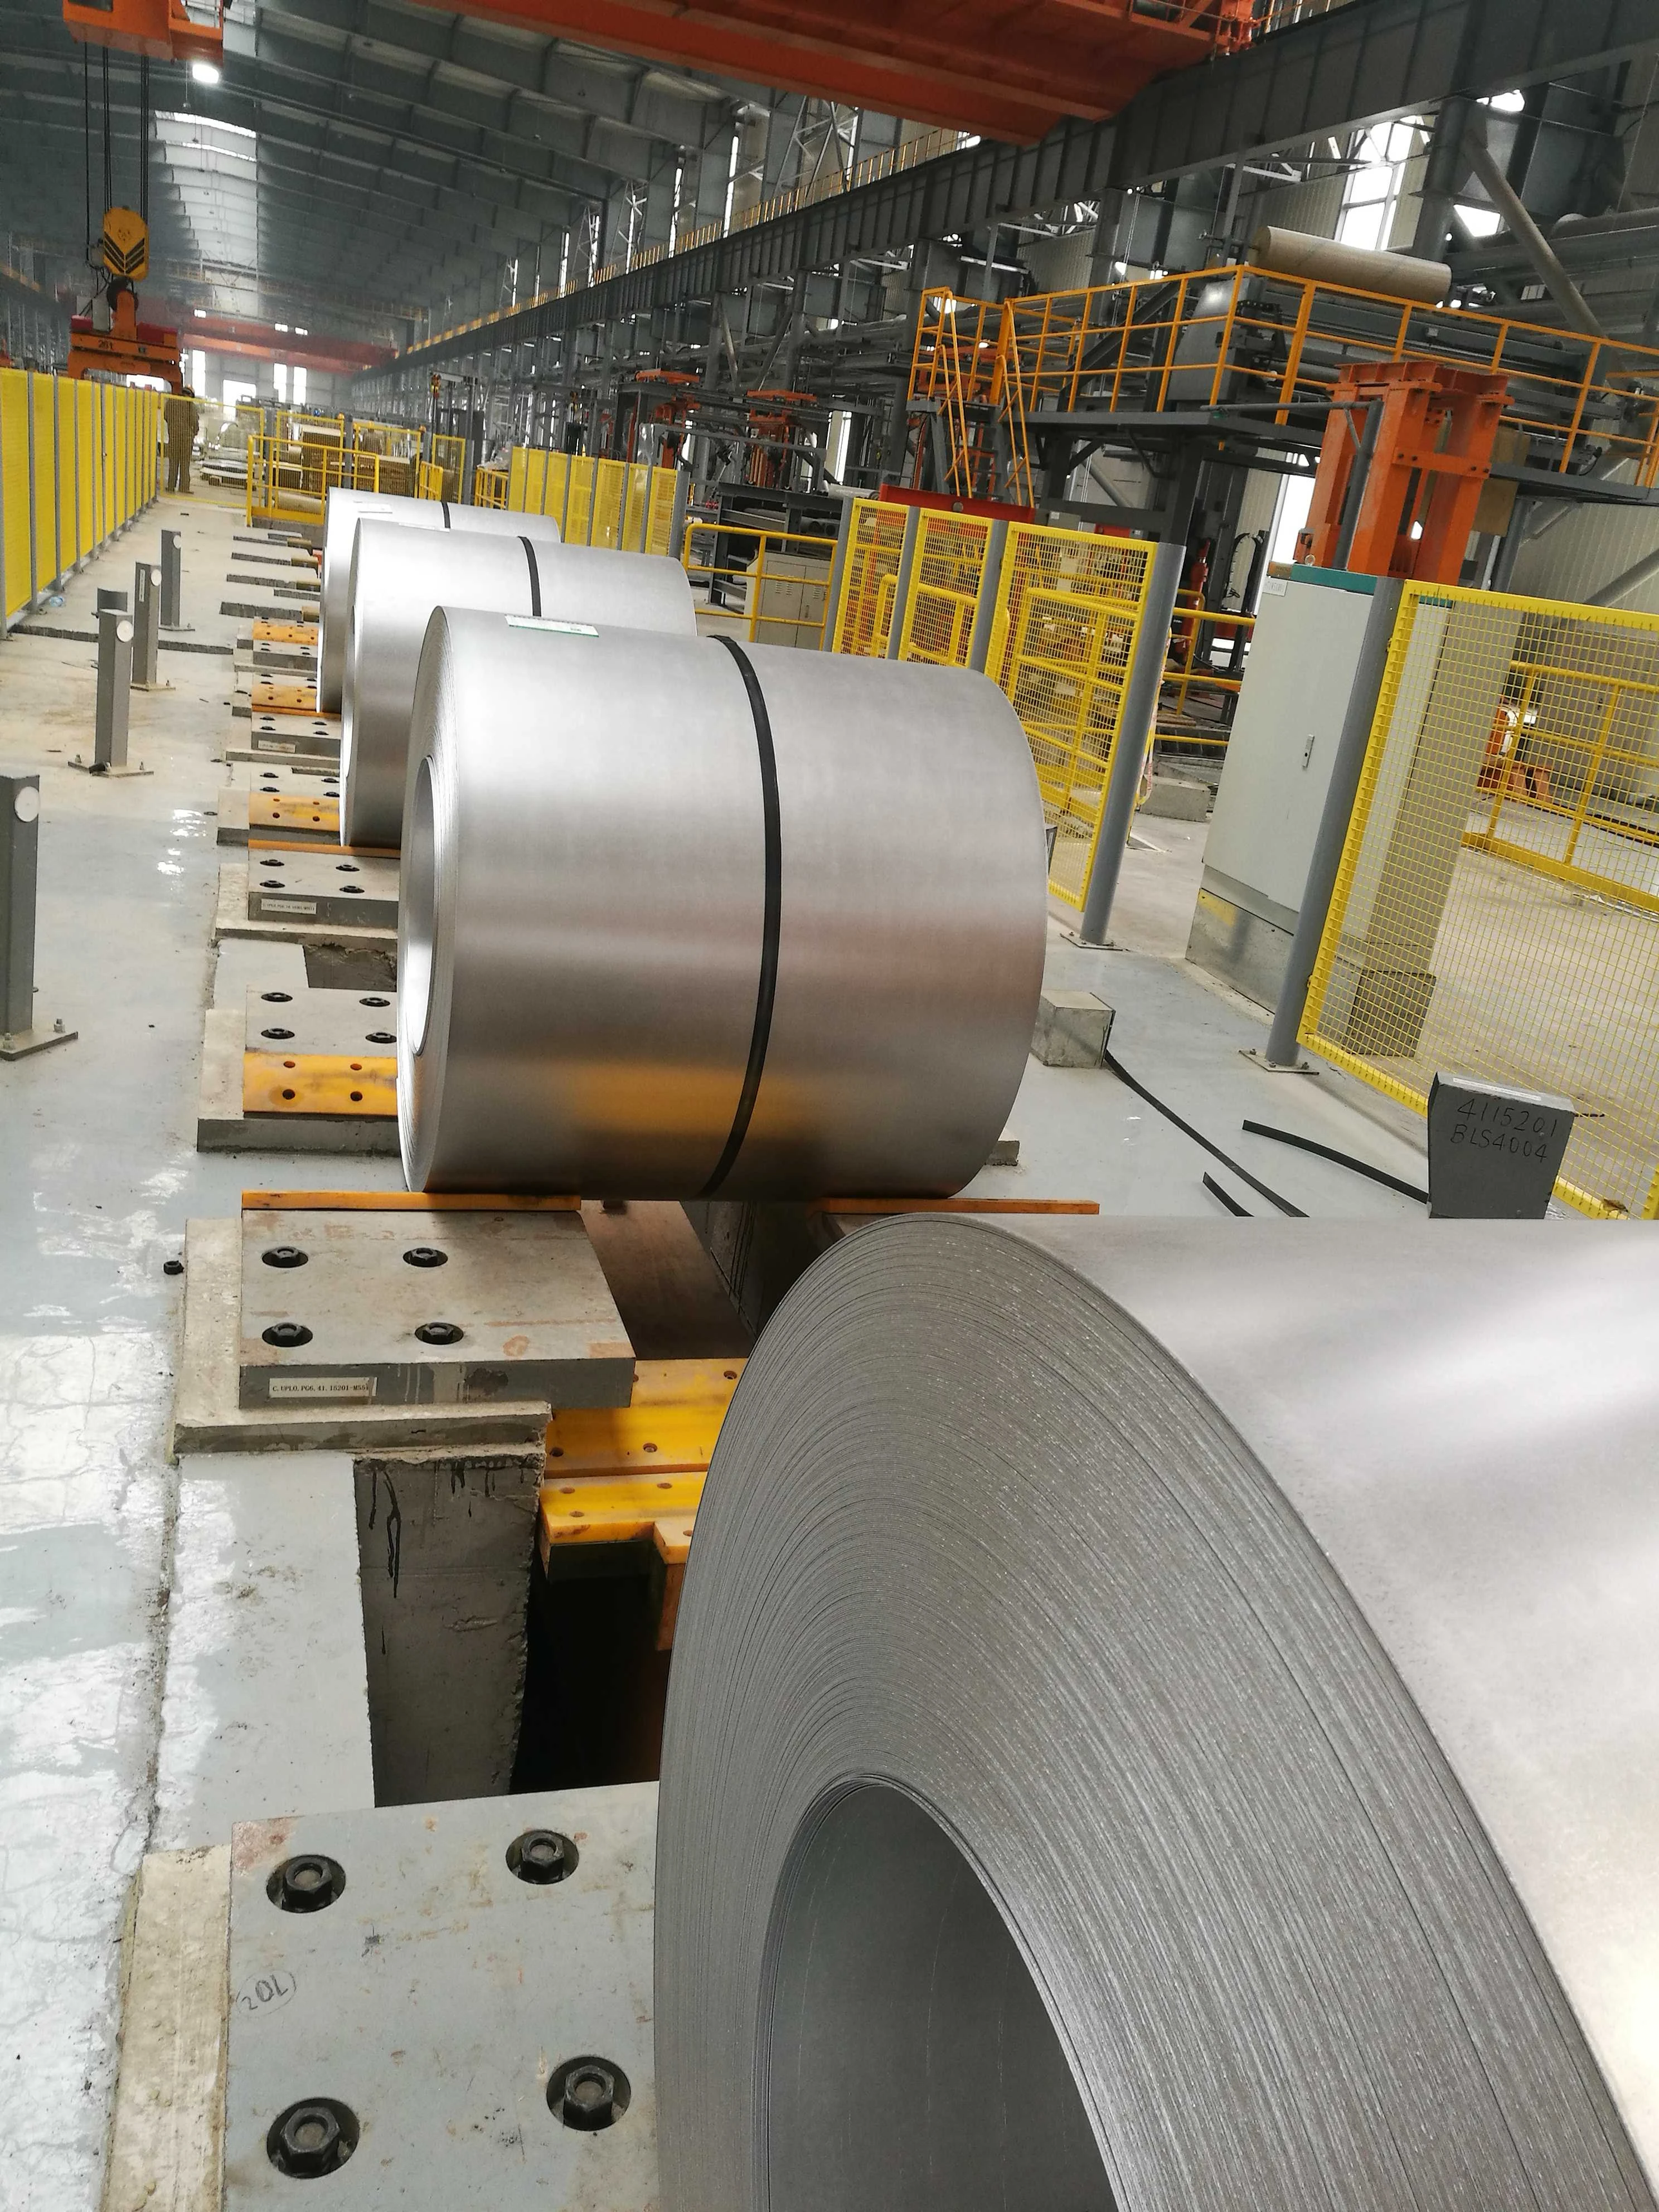 ASTM A463 Type1  AS240-300  Alumininized coated steel coil  Hot dip aluminized steel sheet Al-silicon alloy coated steel  coil